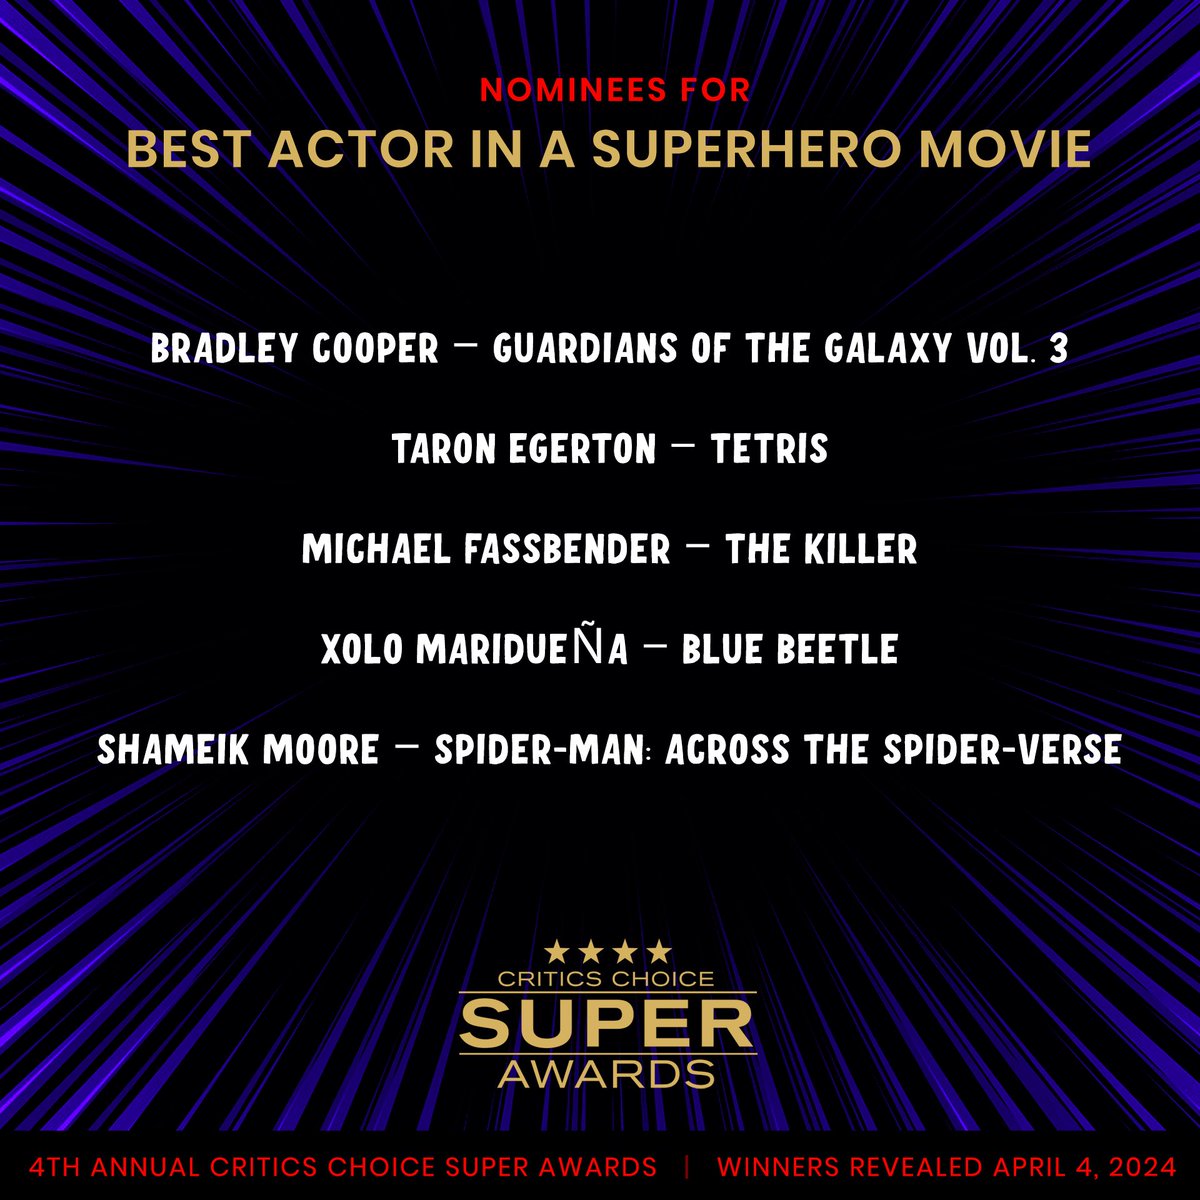 Congratulations to our Critics Choice Super Awards 'BEST ACTOR IN A SUPERHERO MOVIE' nominees! Winners will be announced April 4th, 2024.⭐️⭐️⭐️⭐️ #CriticsChoice #CCSuperAwards